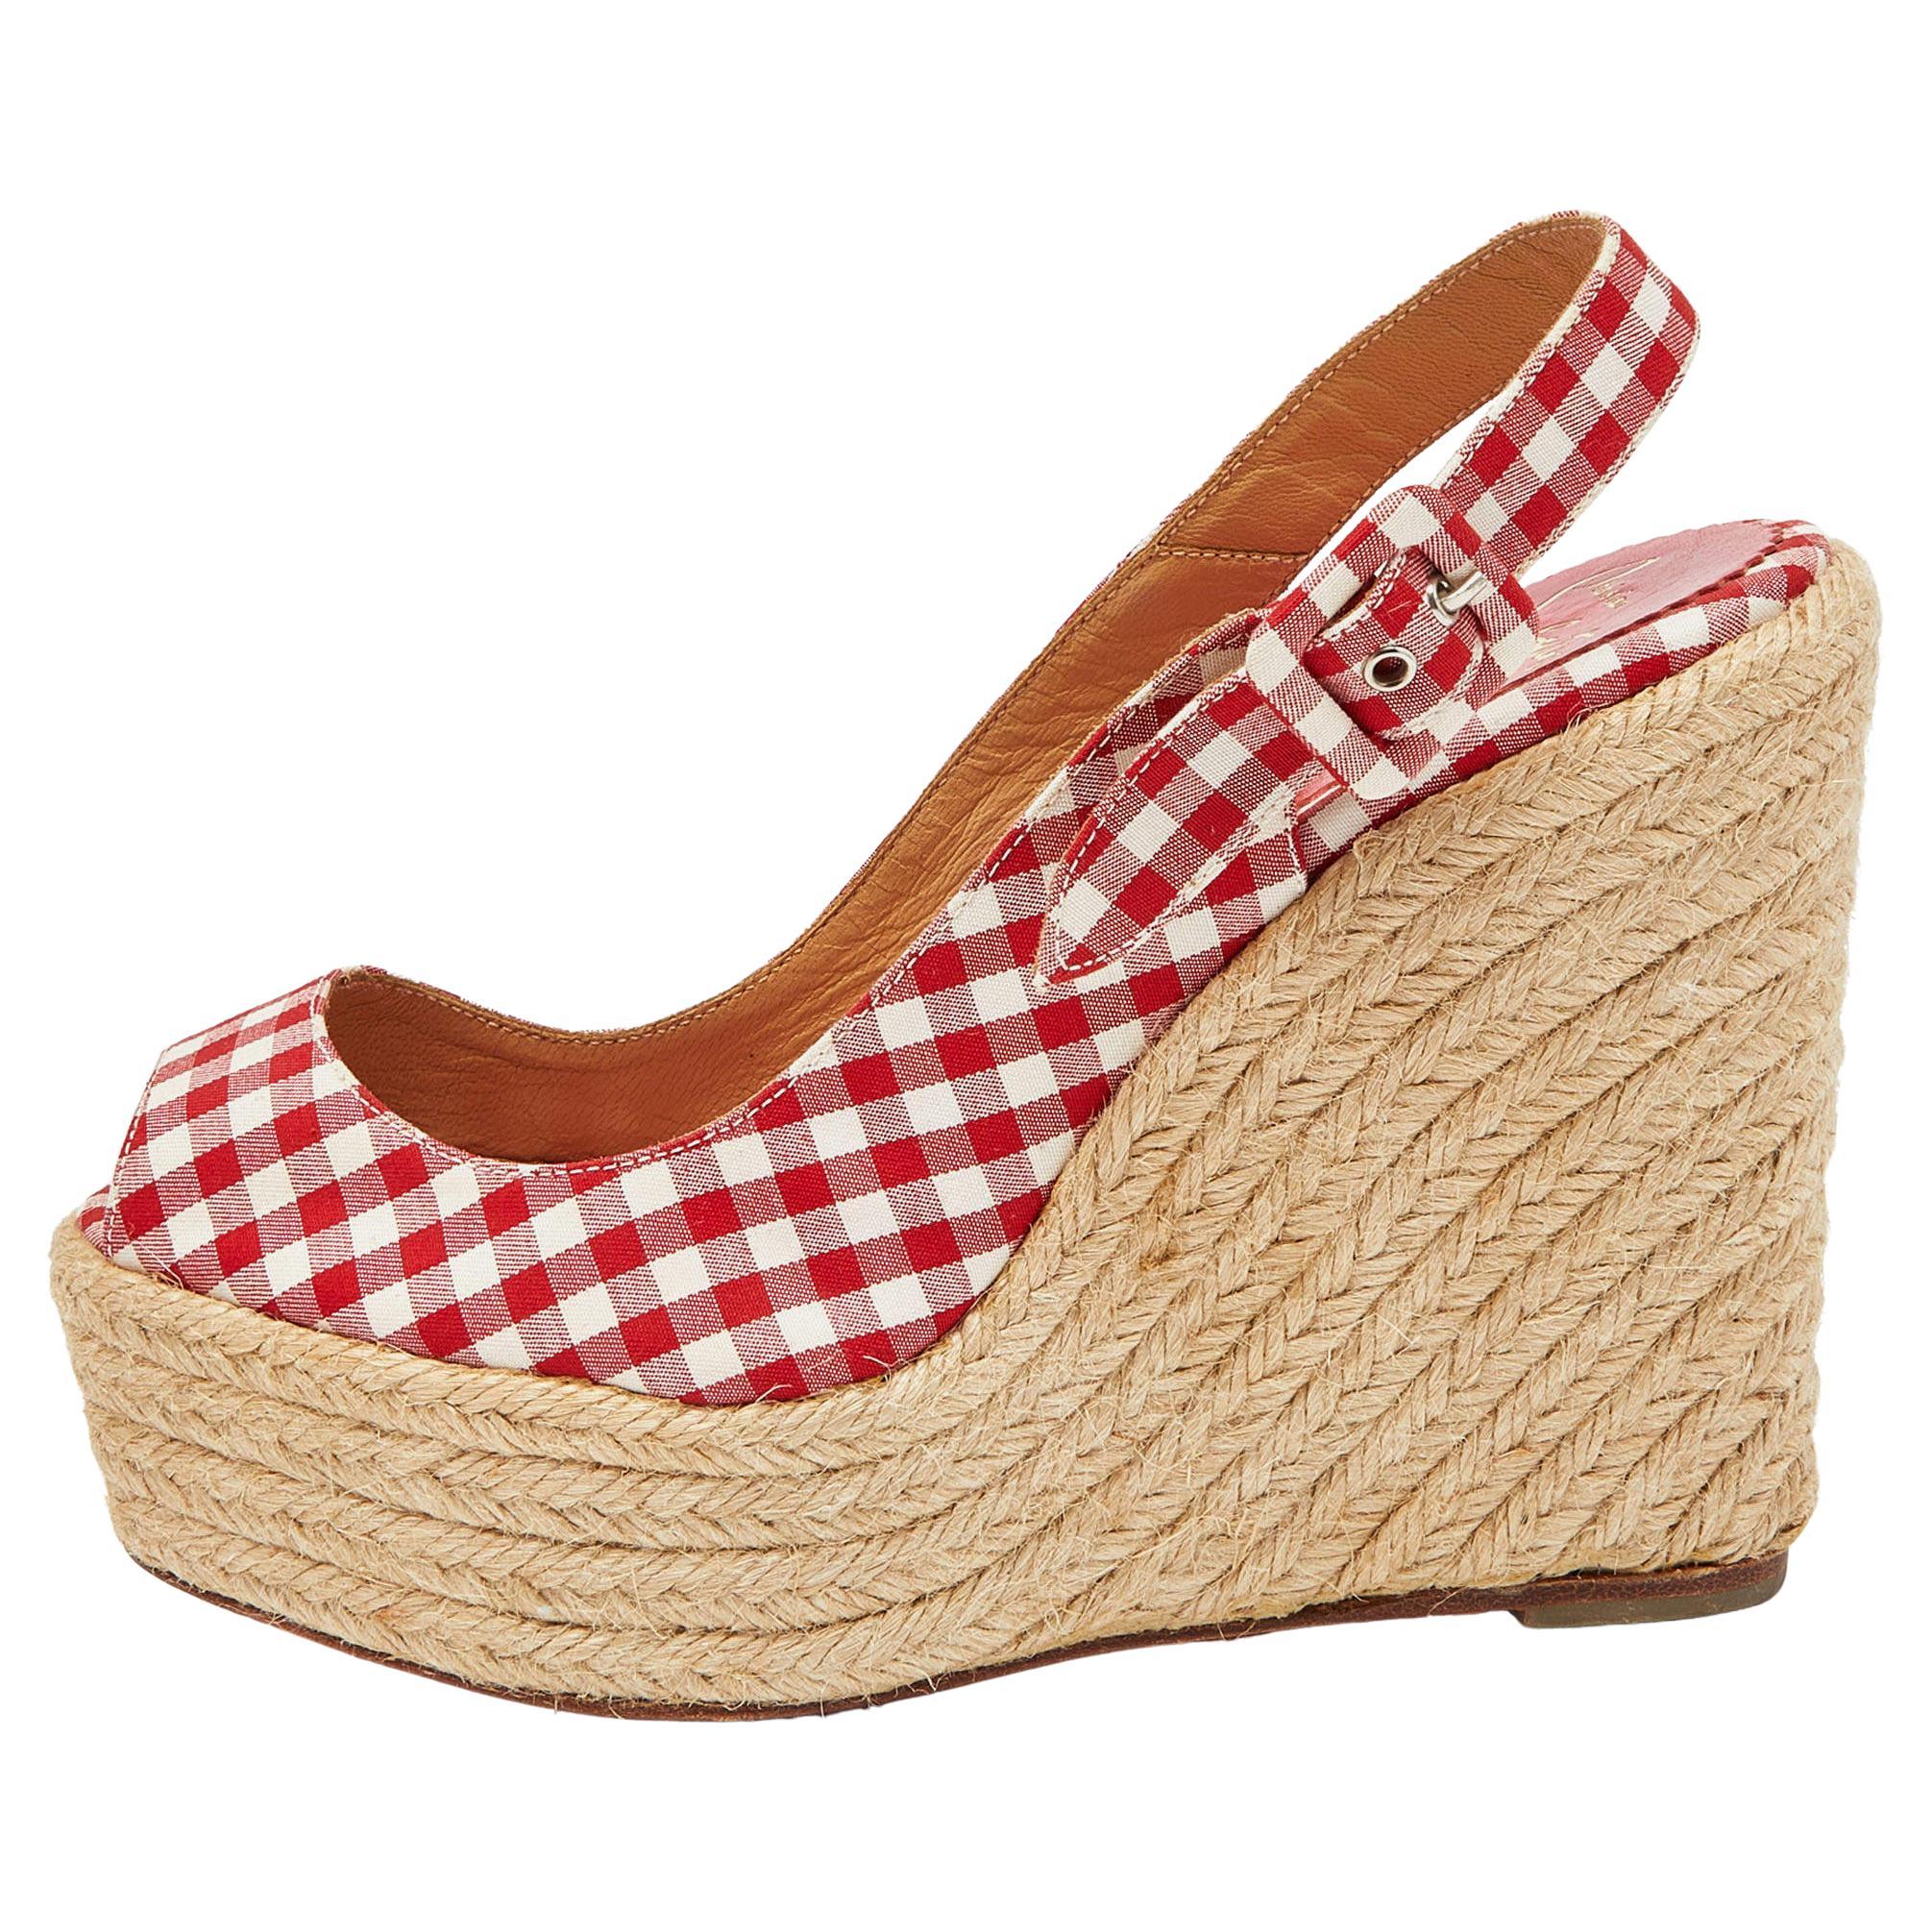 Christian Louboutin Red/White Gingham Fabric Menorca Espadrille Wedge Size 37 For Sale